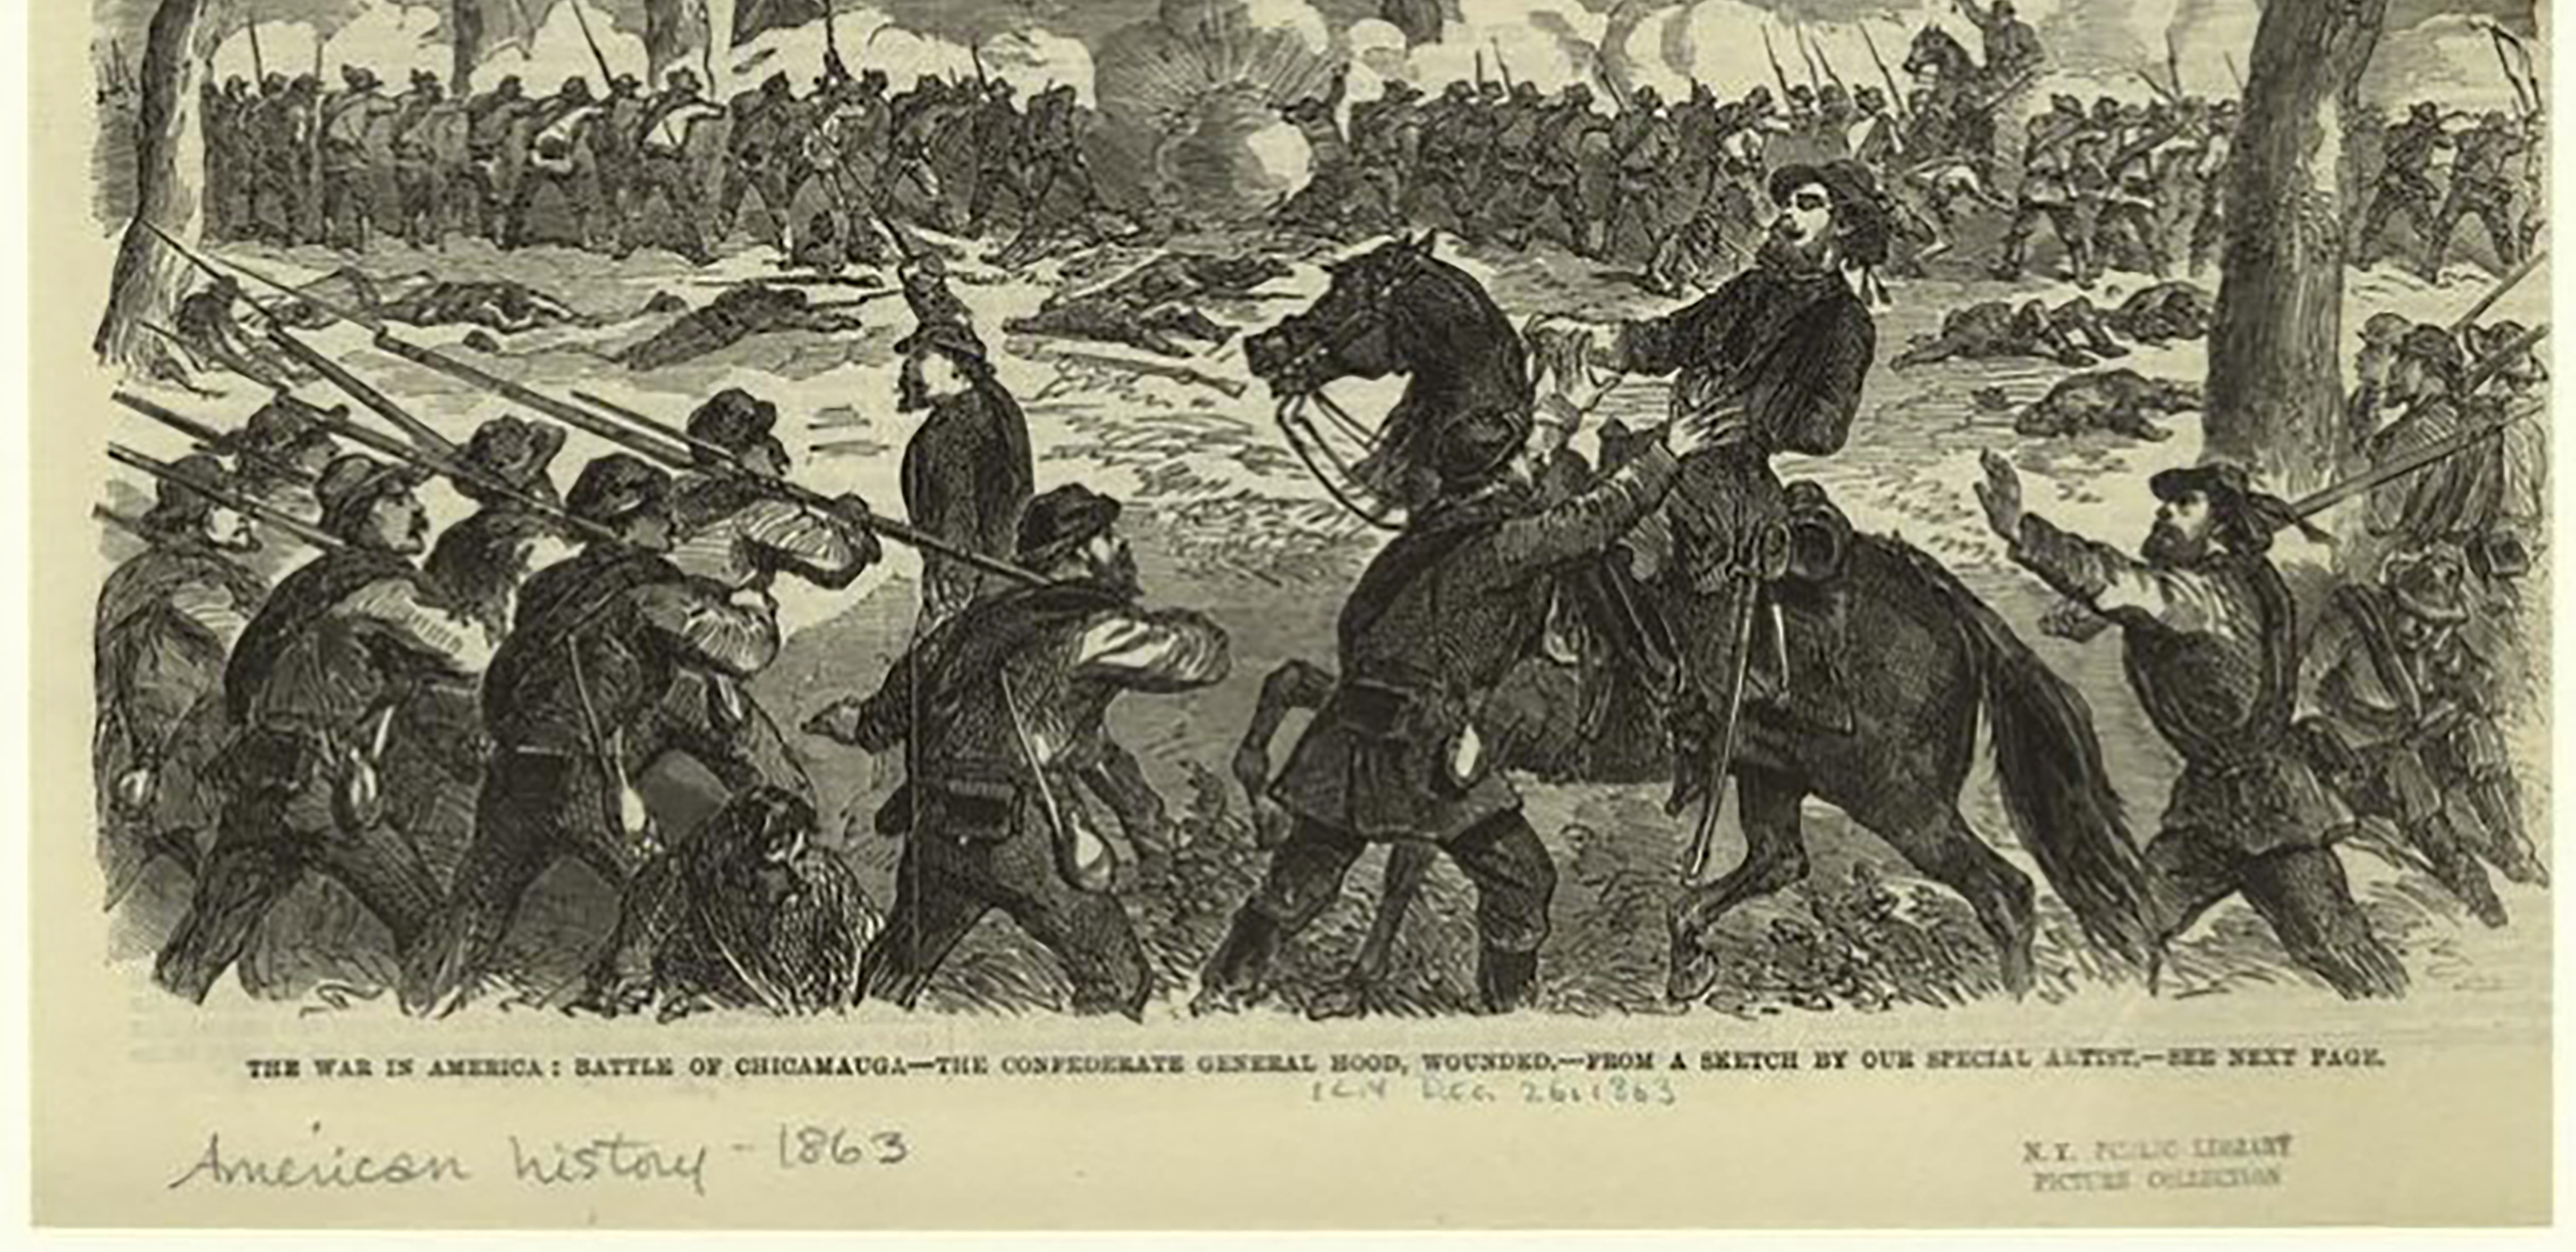 Black and white drawing of soldiers in a battle during the civil war.